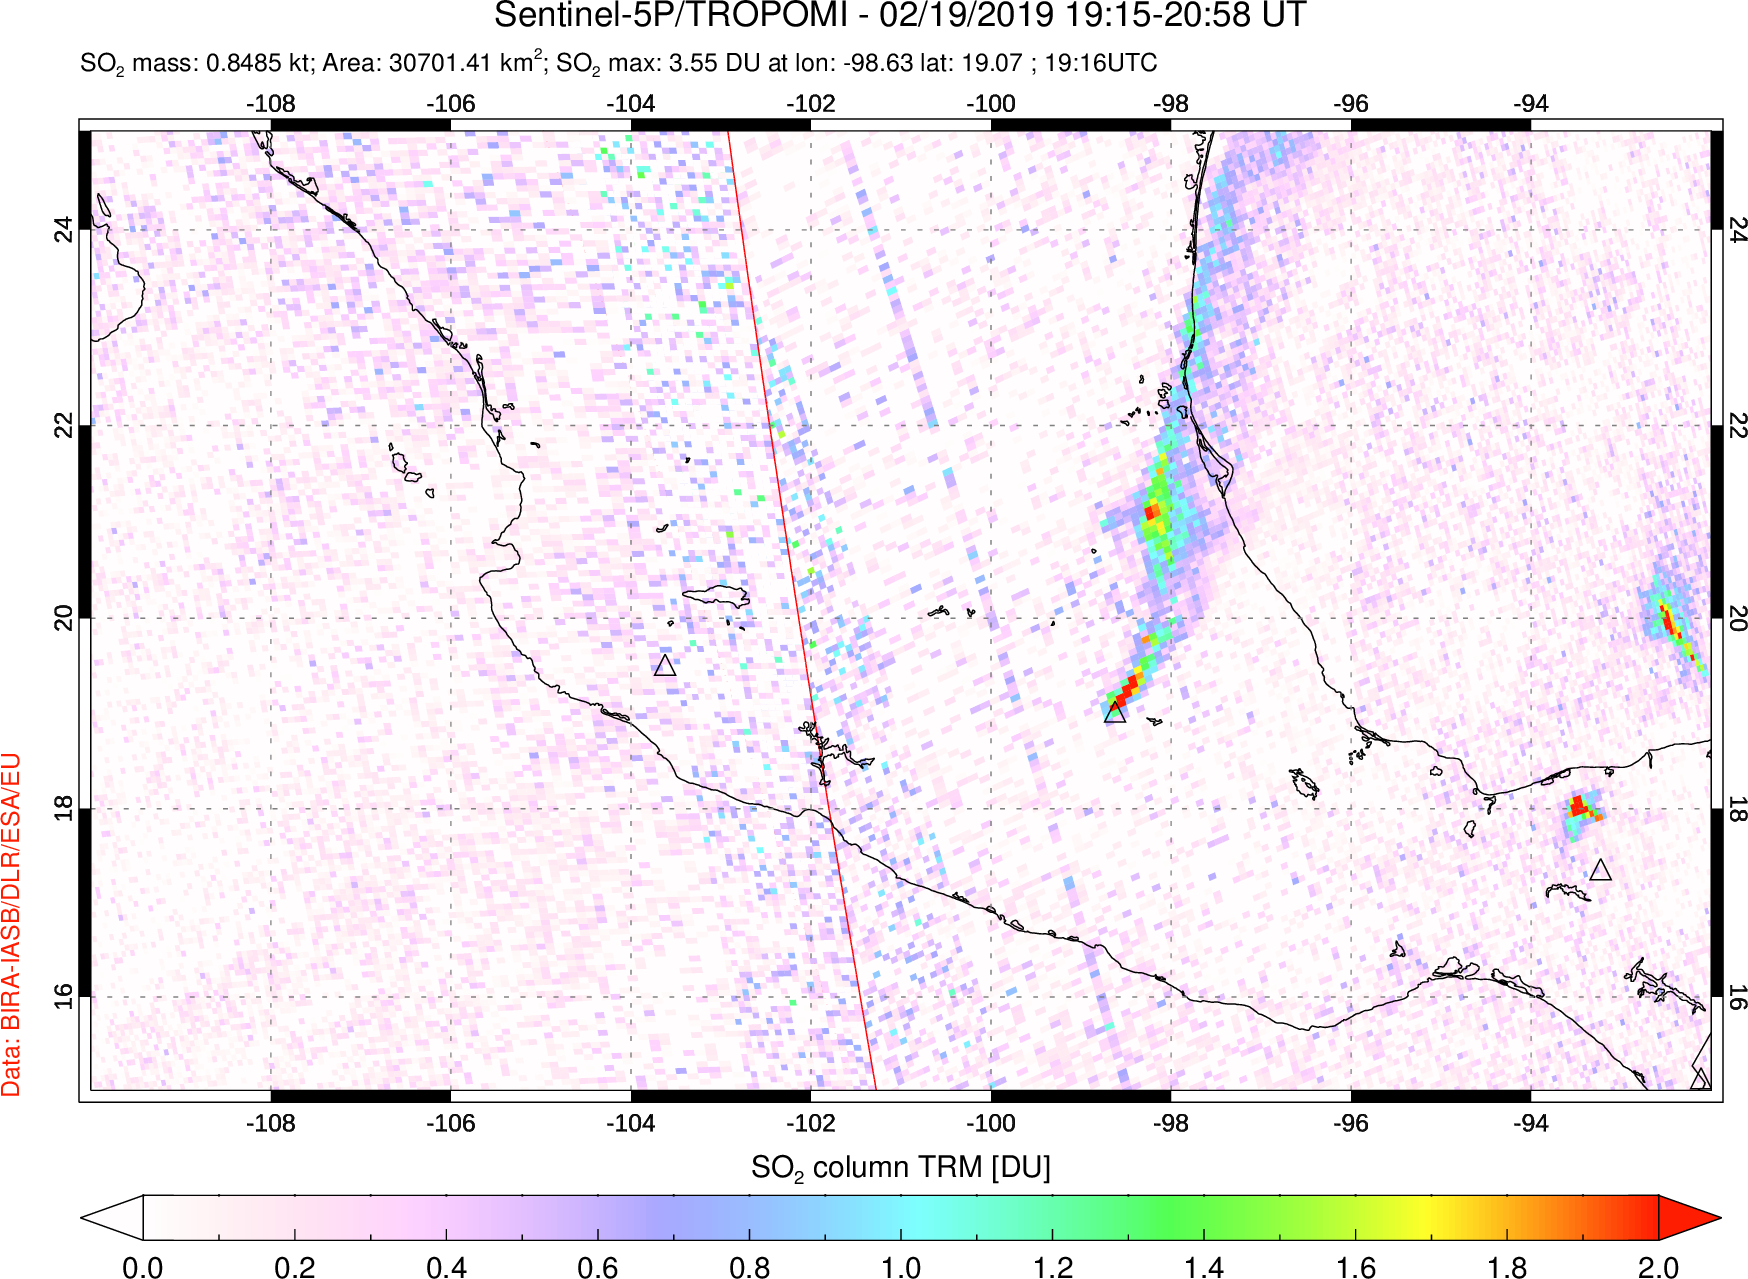 A sulfur dioxide image over Mexico on Feb 19, 2019.